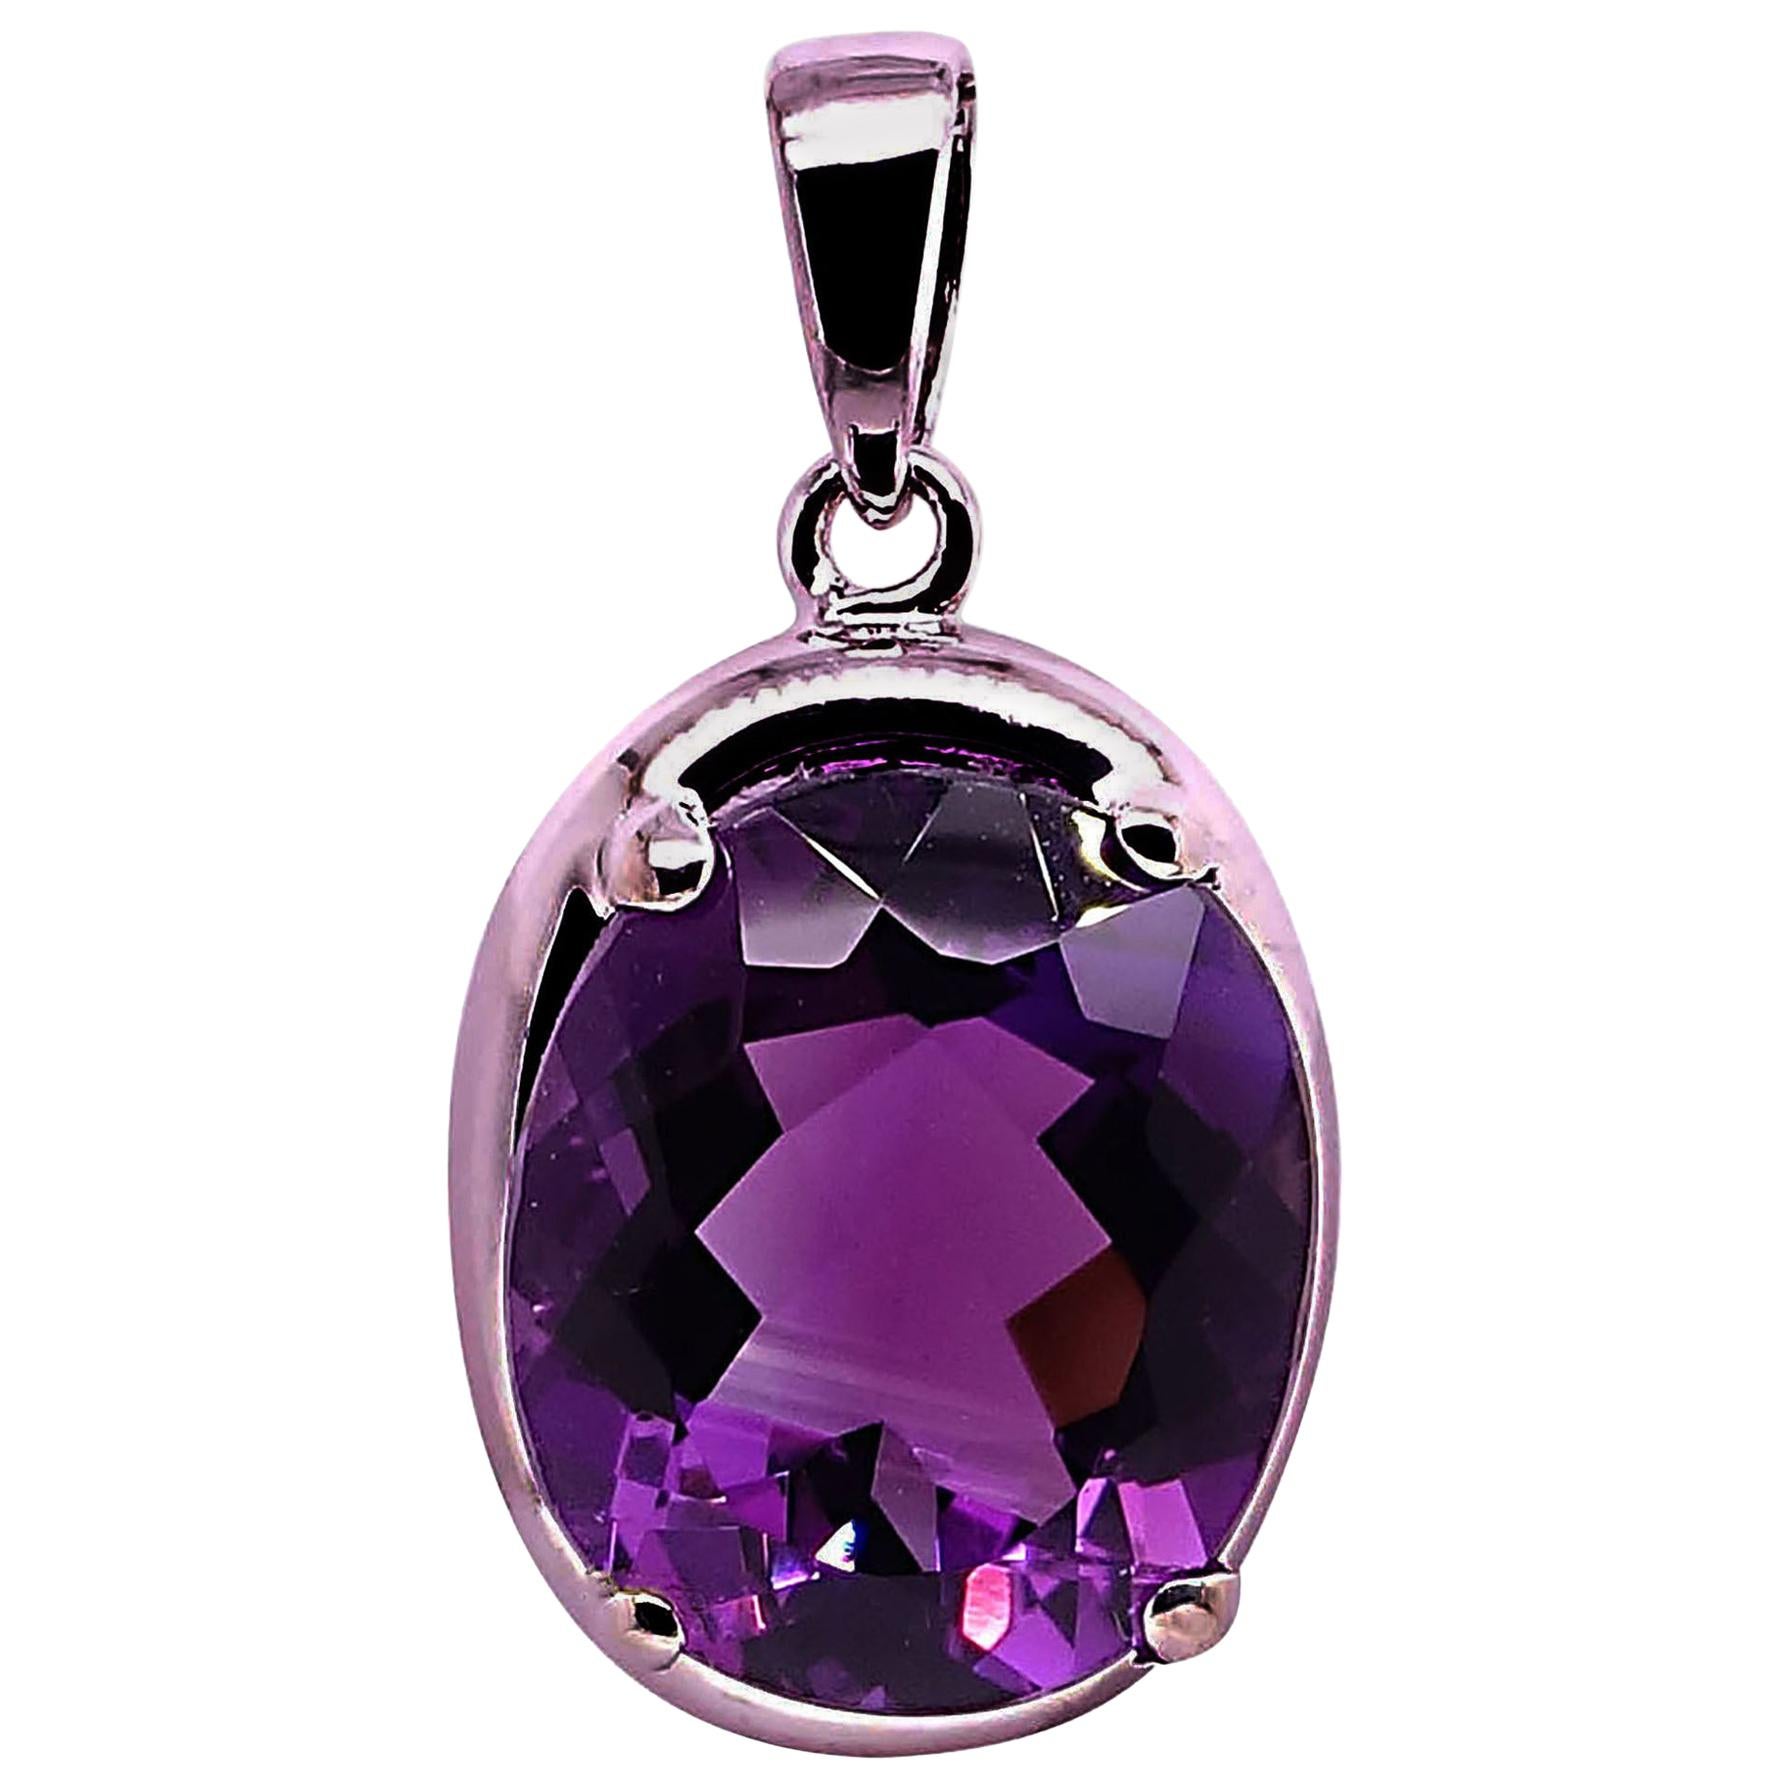 Unique pendant of sparkling oval Amethyst with pink flash set in Sterling Silver. Delightful deep purple Amethyst with a pink flash pendant for all you Amethyst lovers.  The Amethyst is approximately 6.53 carats and measures 15 x 10 MM.  The pendant